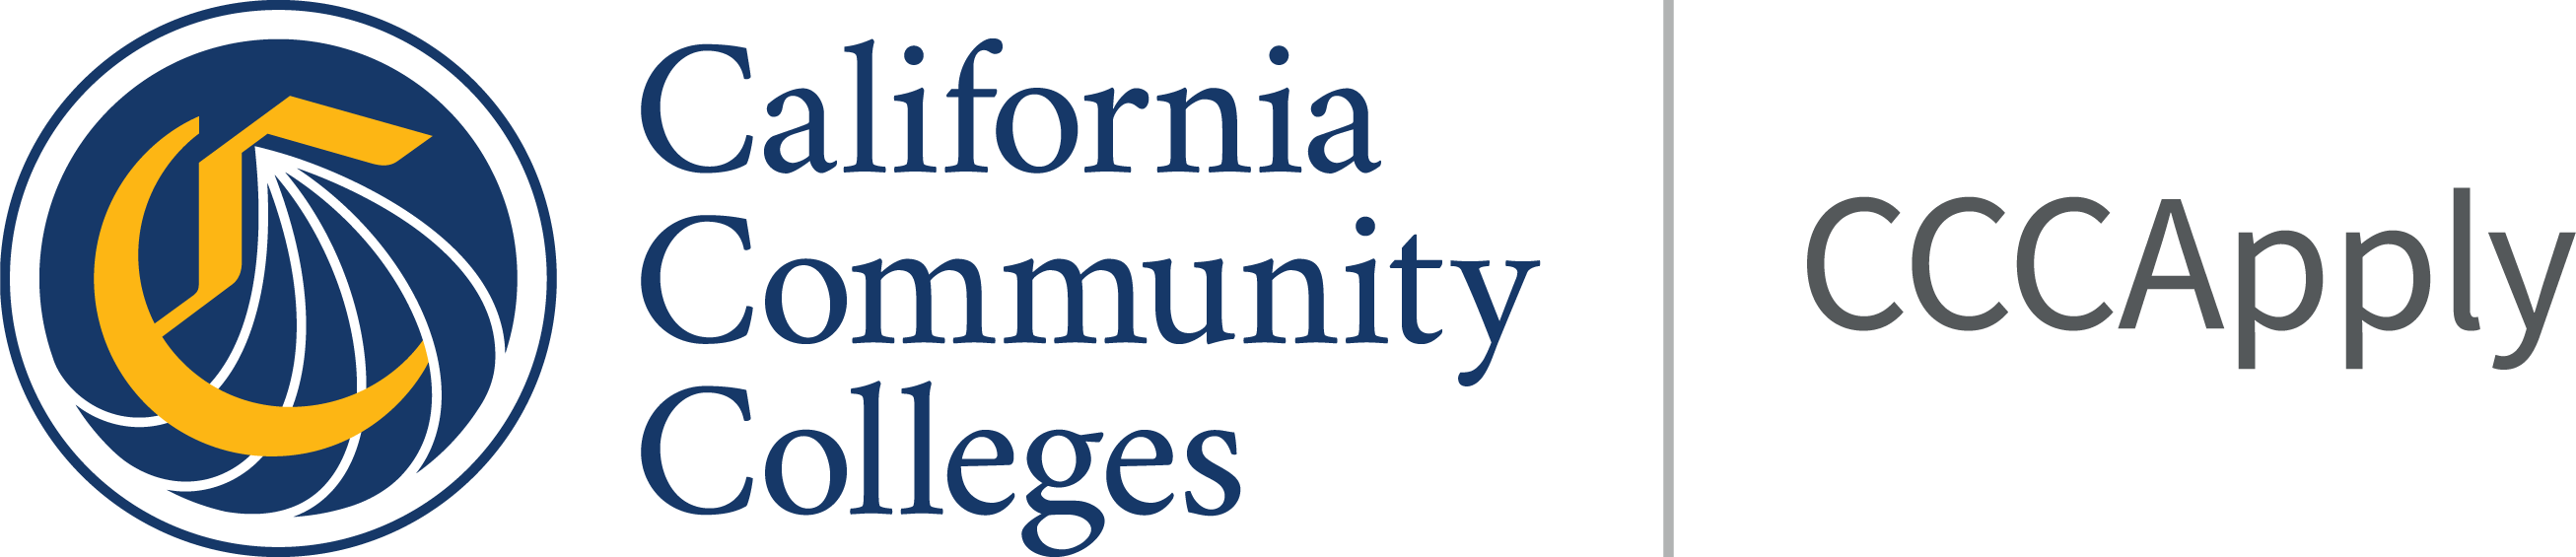 California Community Colleges CCCApply